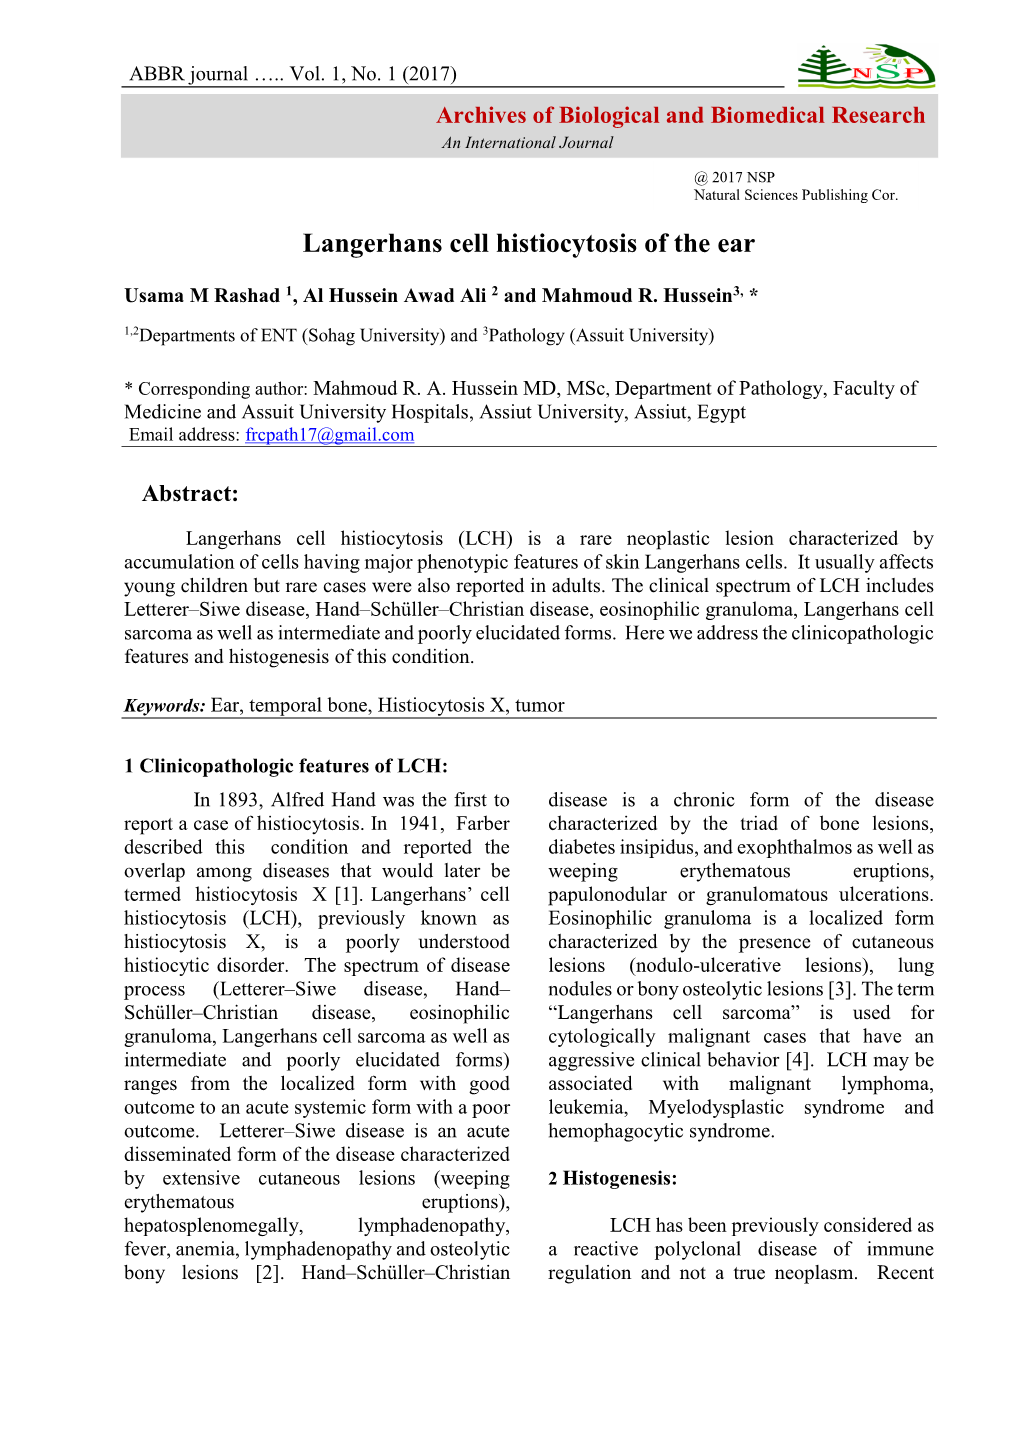 Langerhans Cell Histiocytosis of the Ear -.:: Natural Sciences Publishing